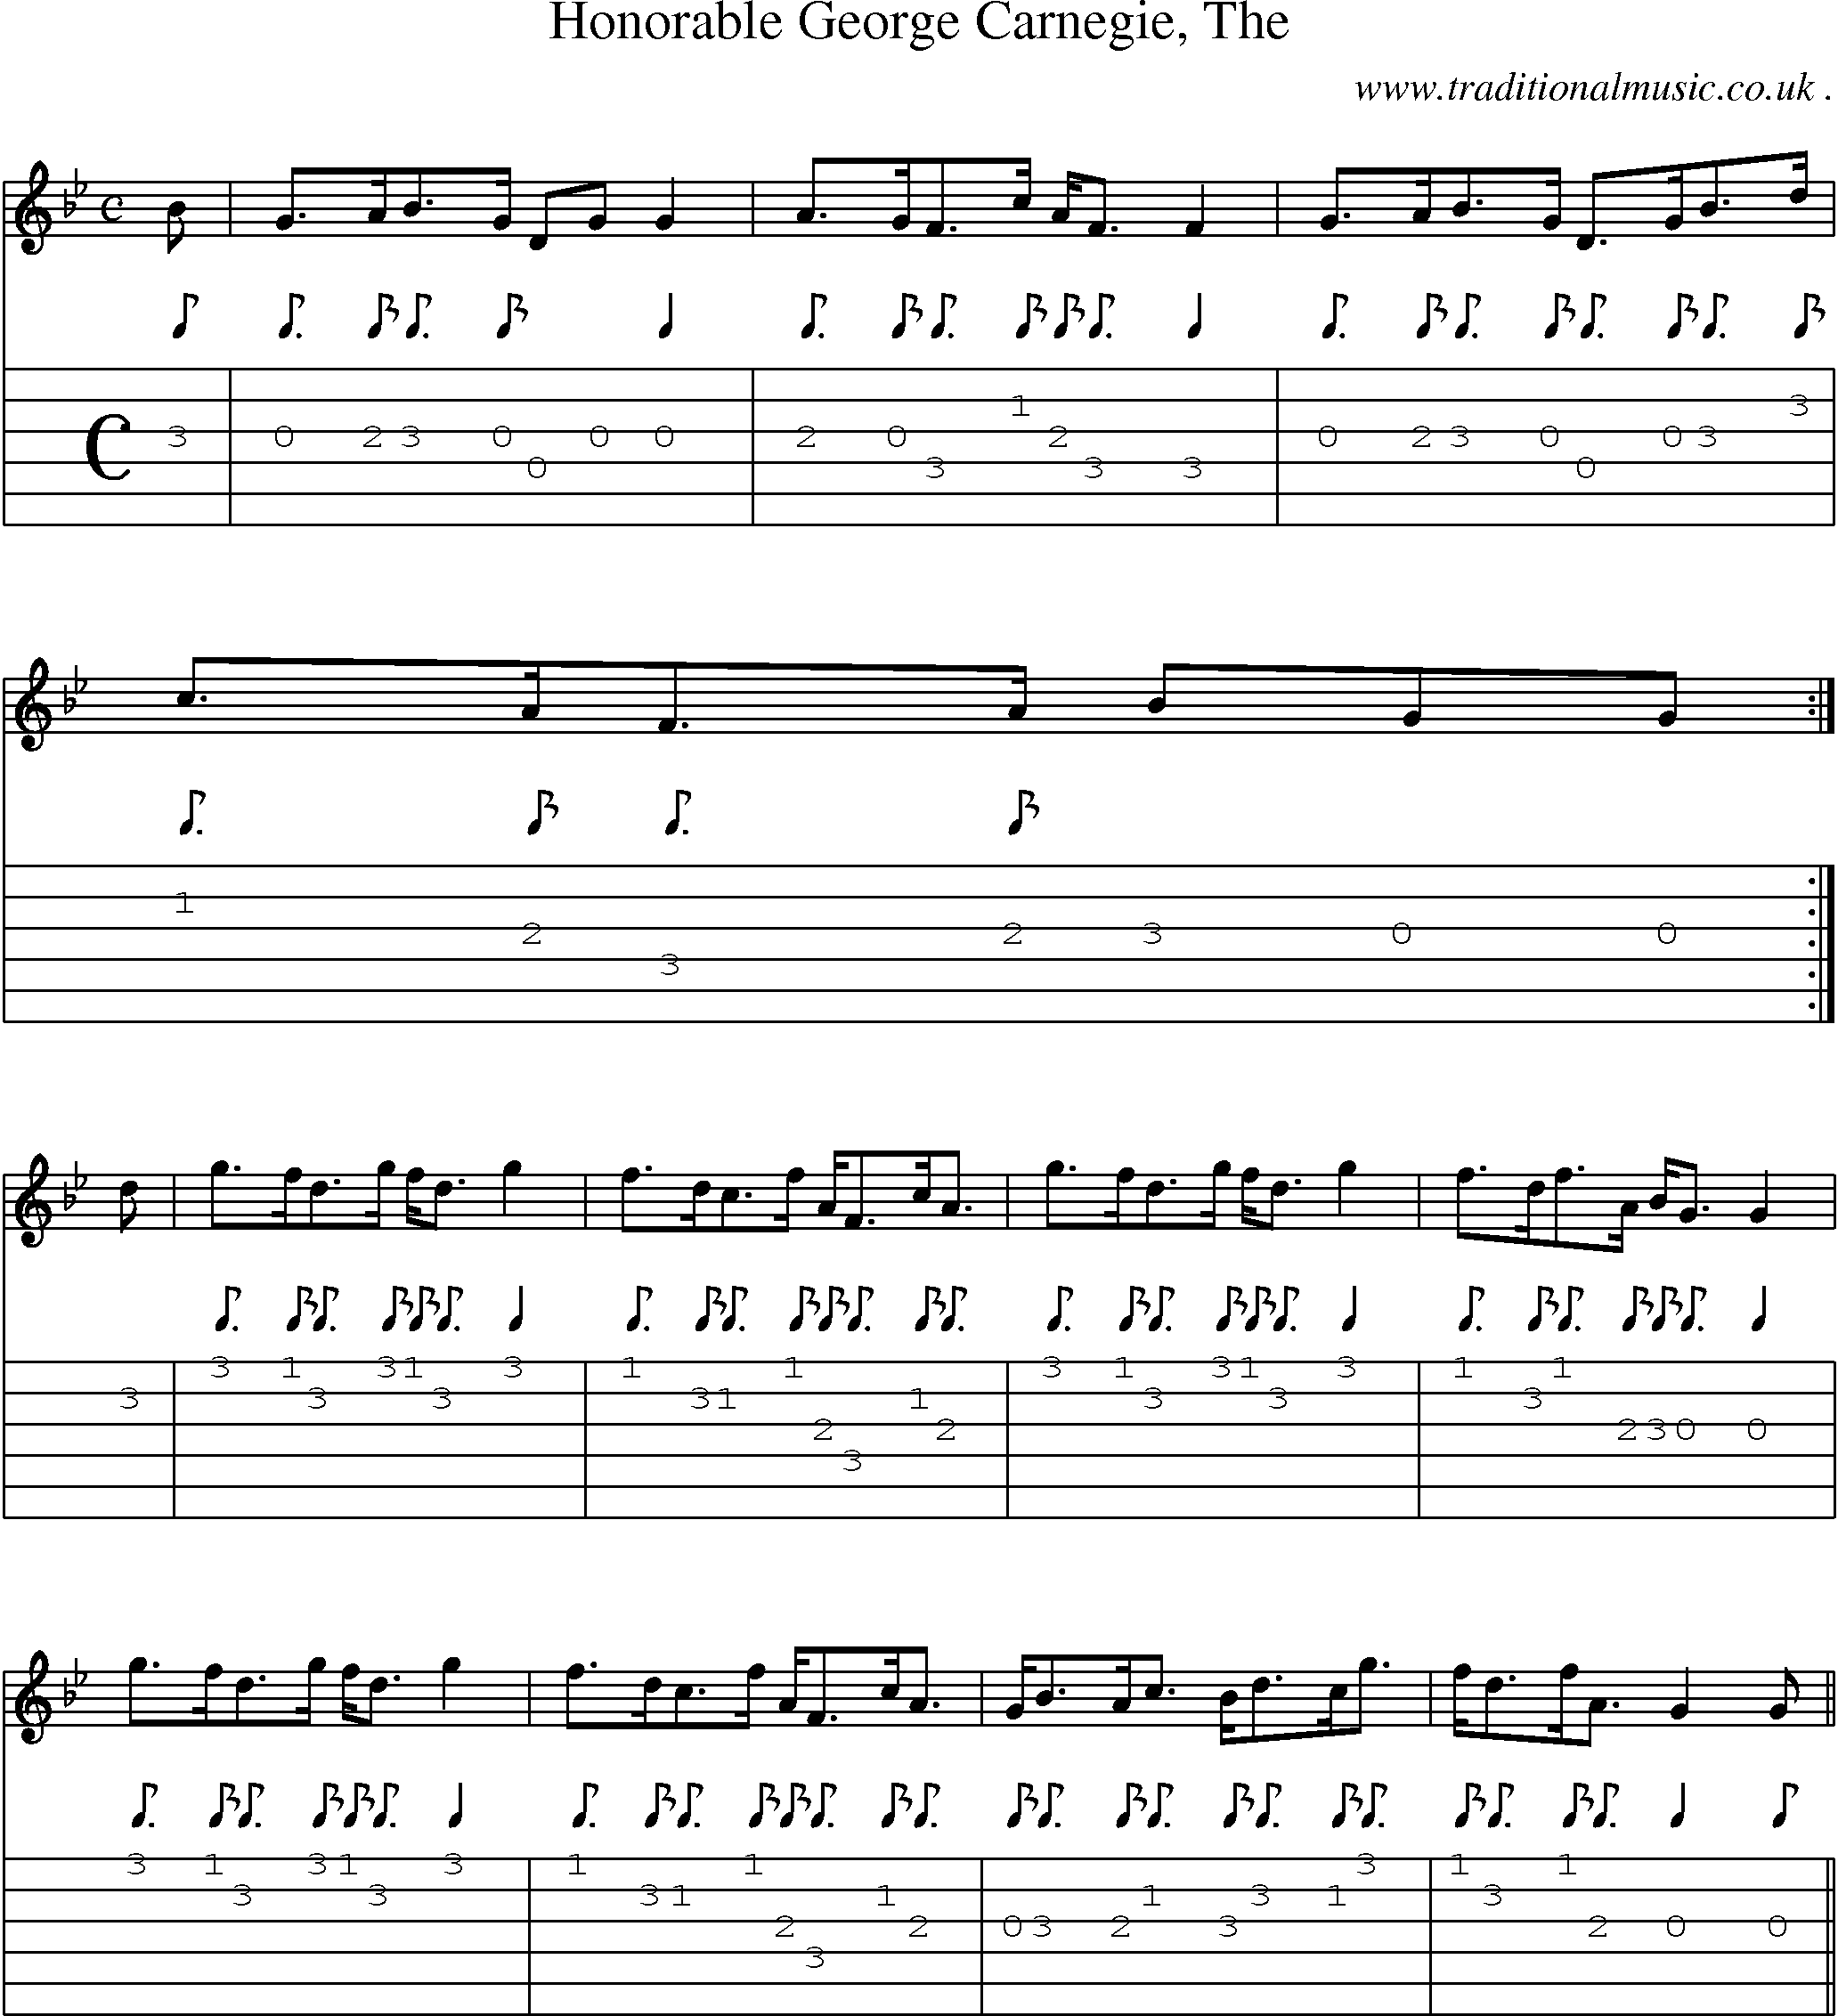 Sheet-music  score, Chords and Guitar Tabs for Honorable George Carnegie The